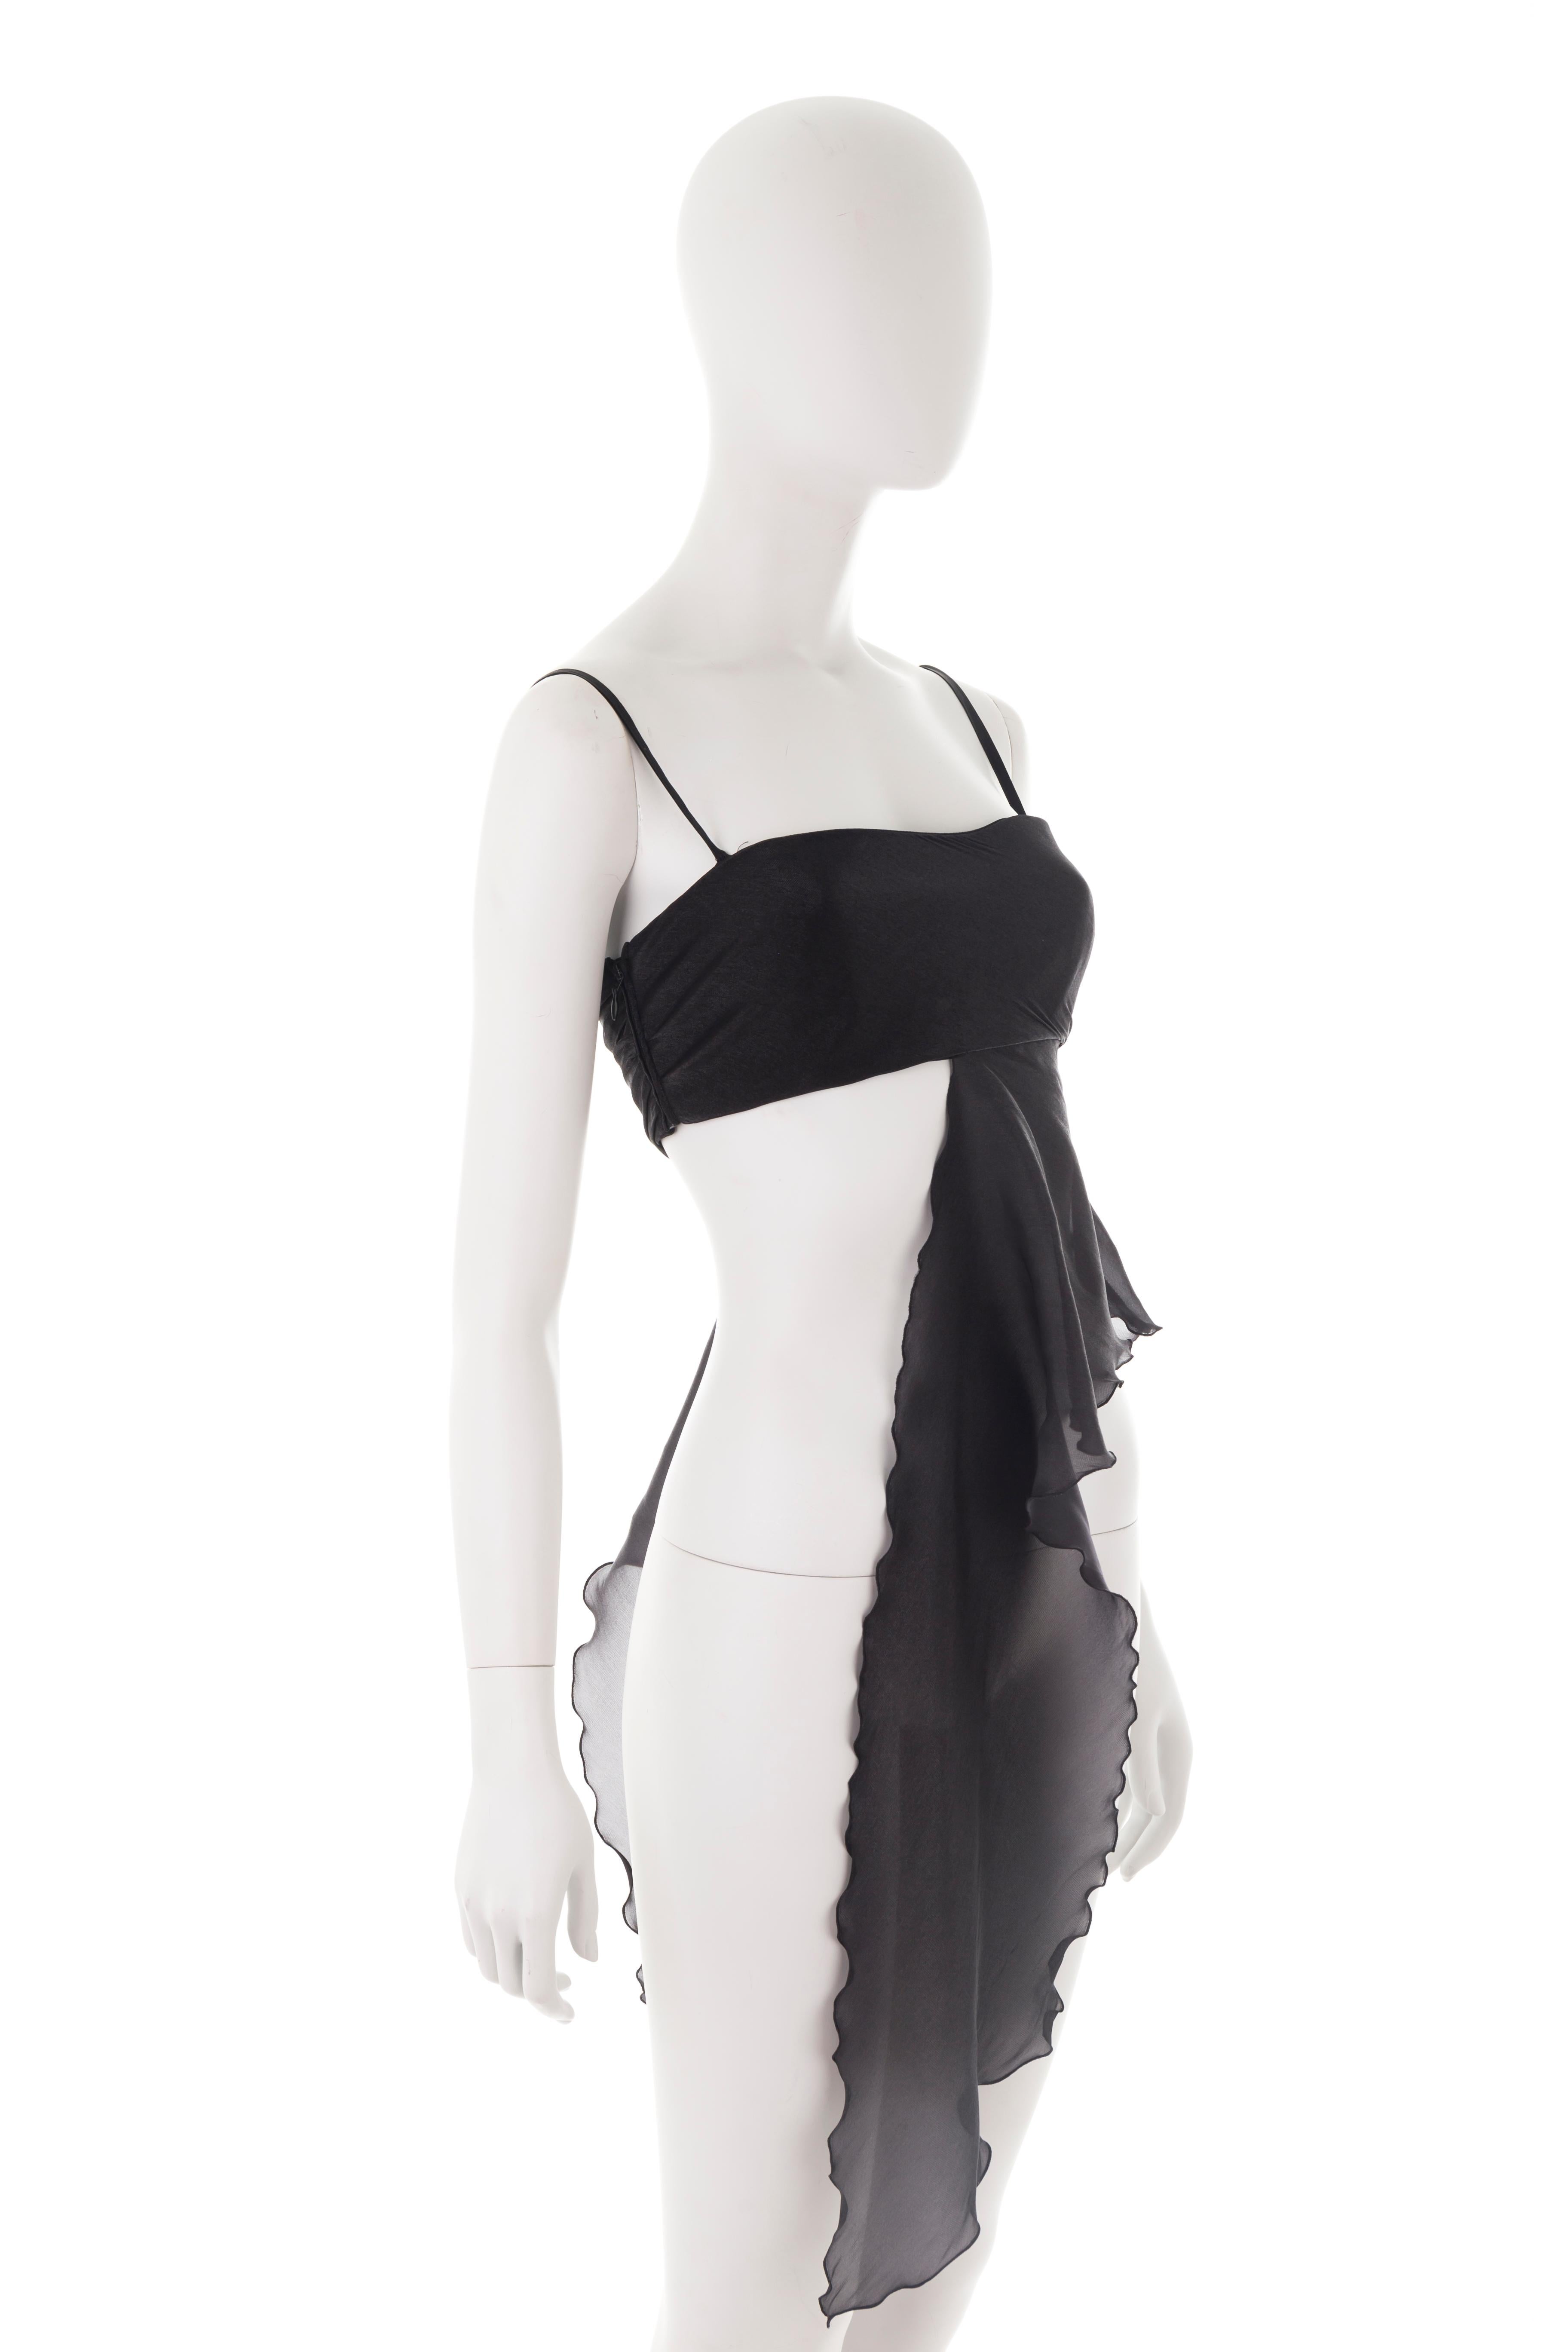 Emporio Armani S/S 2001 ruffled black tube top In Excellent Condition For Sale In Rome, IT